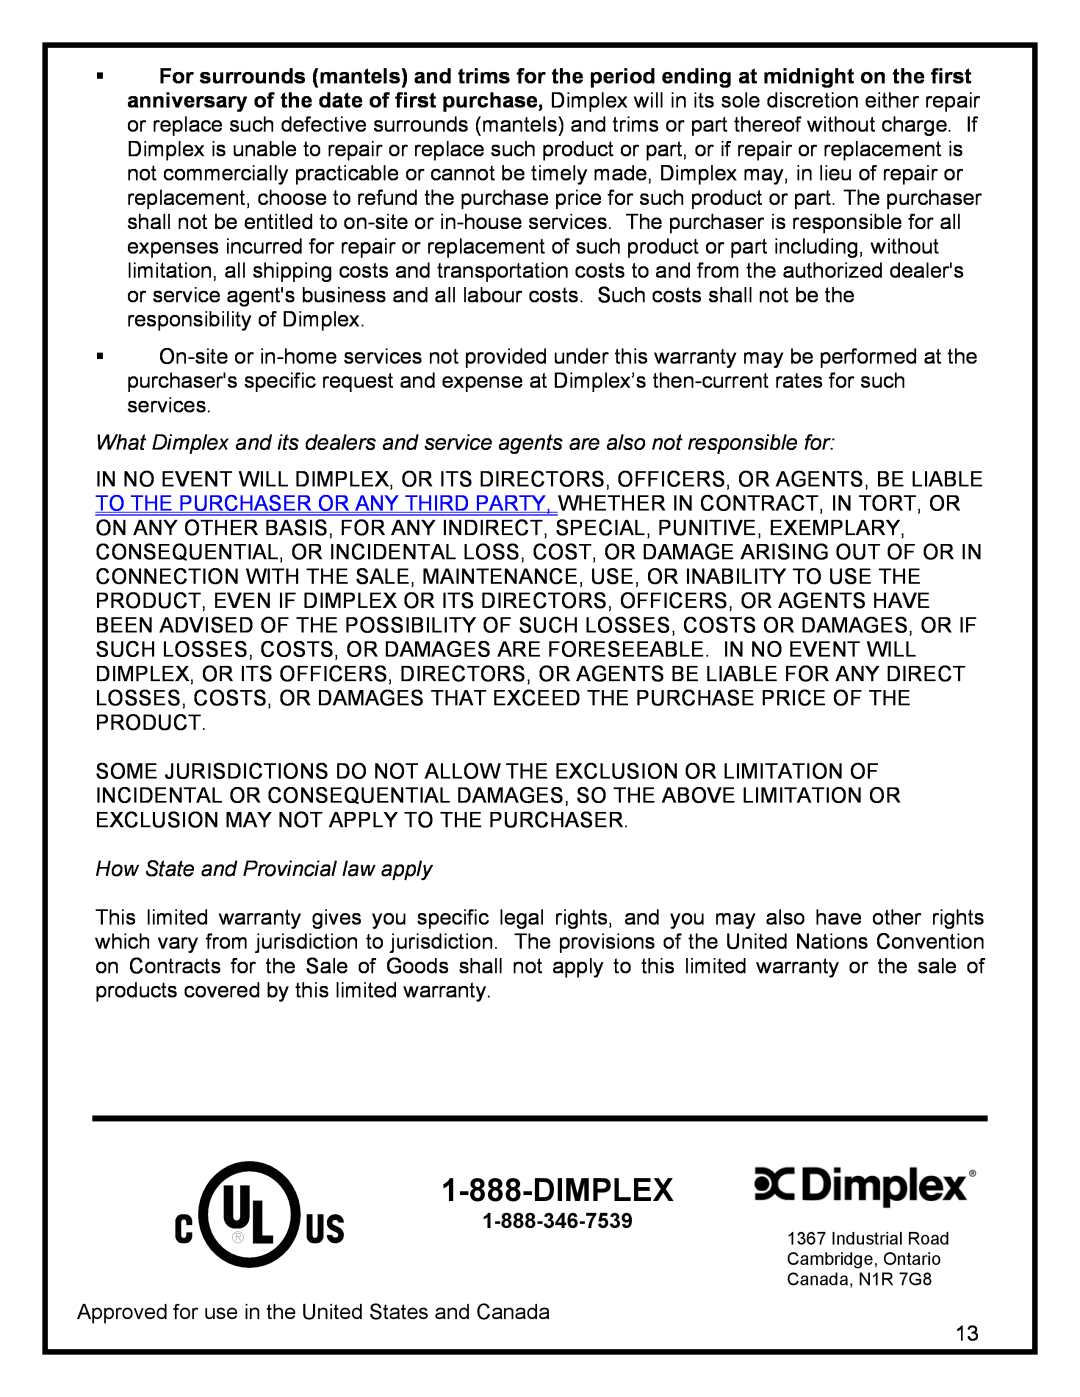 Dimplex DF3003, SF3003 manual Dimplex, How State and Provincial law apply 